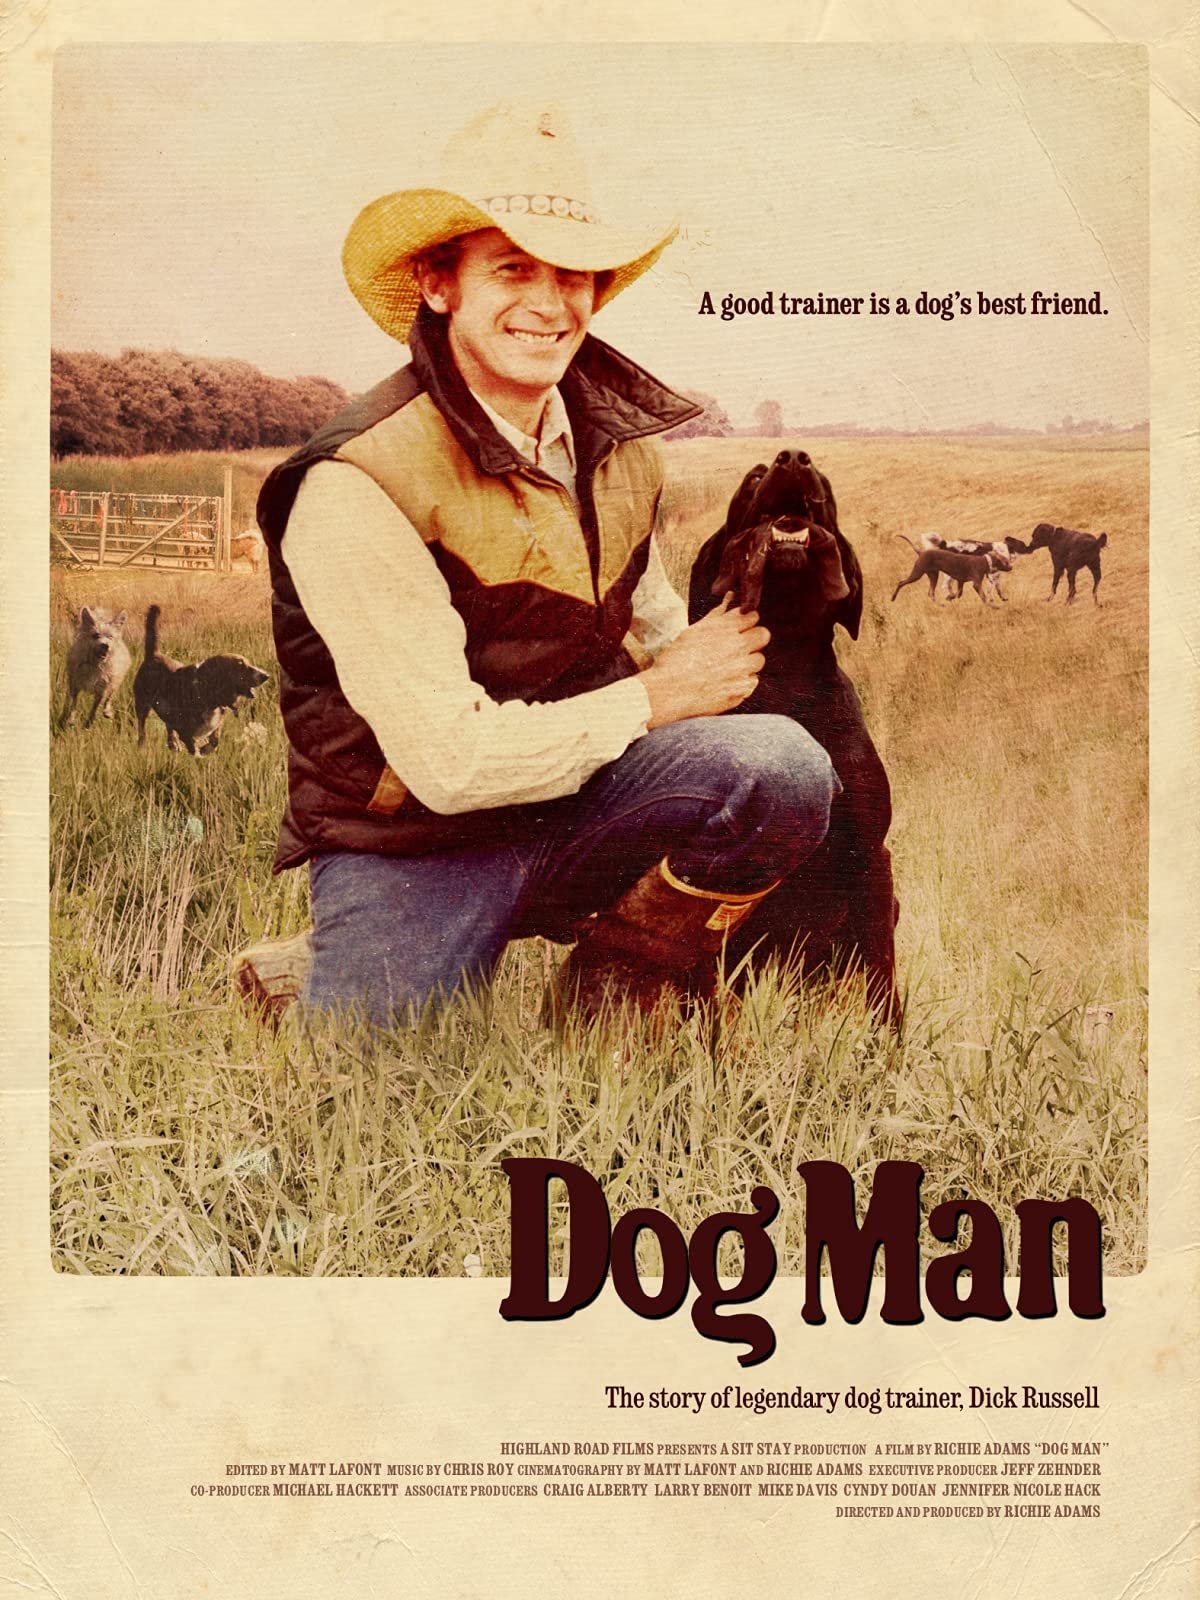 Dog Man: The Story of Legendary Dog Trainer Dick Russell